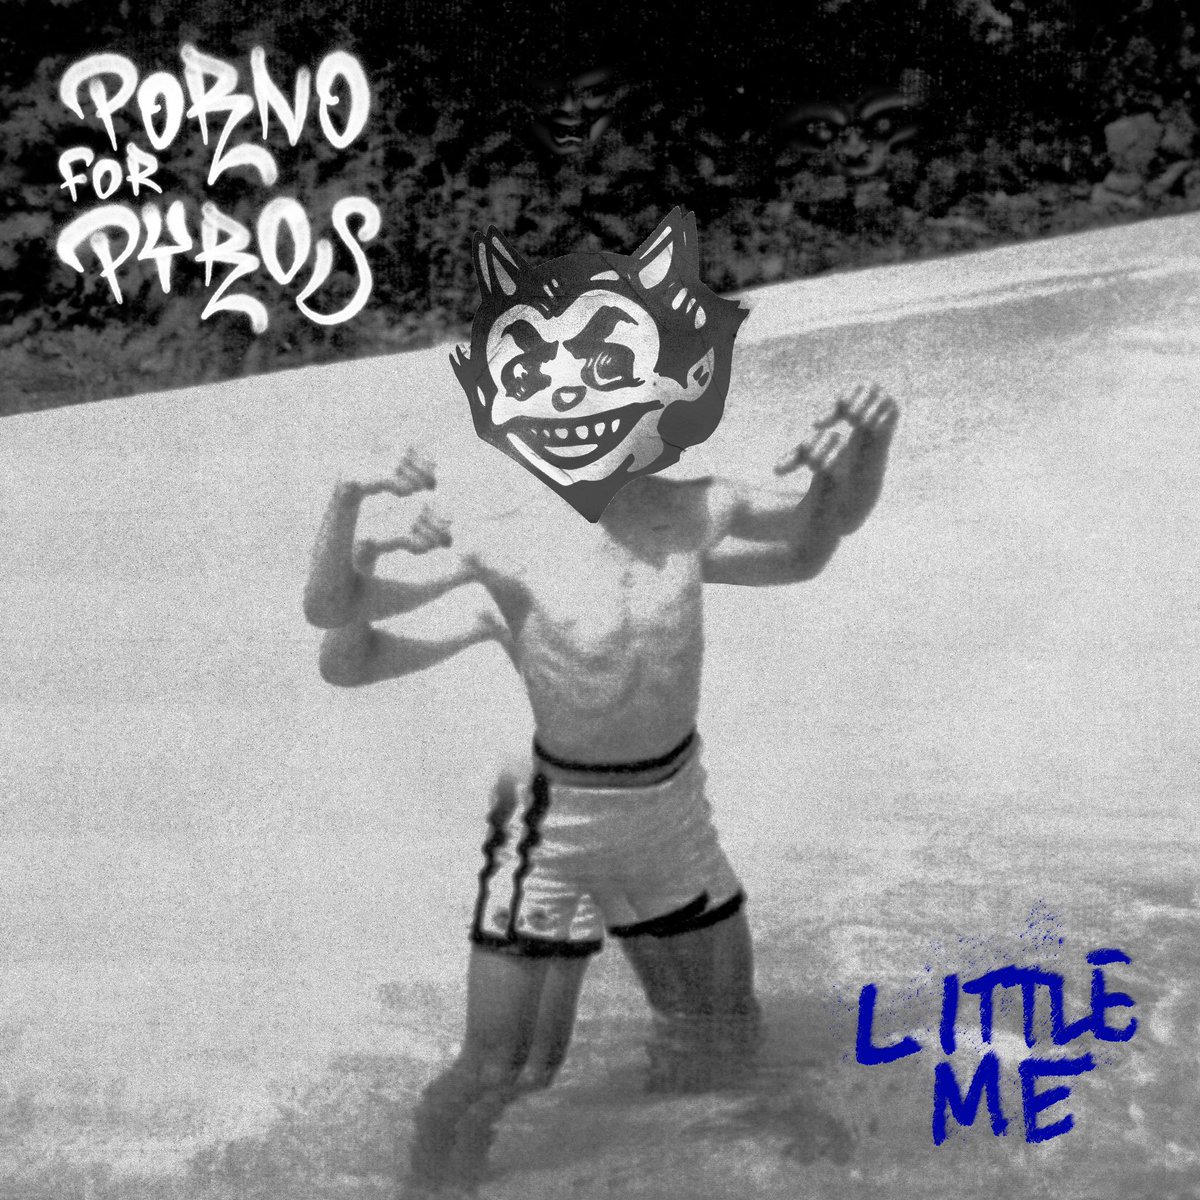 LITTLE ME 🔥🔥🔥🔥🔥 NOW STREAMING 🤘🤘🤘🤘 SEE U ON TOUR SOON ❤️‍🔥❤️‍🔥❤️‍🔥❤️‍🔥❤️‍🔥 pornoforpyros.lnk.to/LittleMe 😈😈😈😈😈😈😈😈😈😈😈😈😈